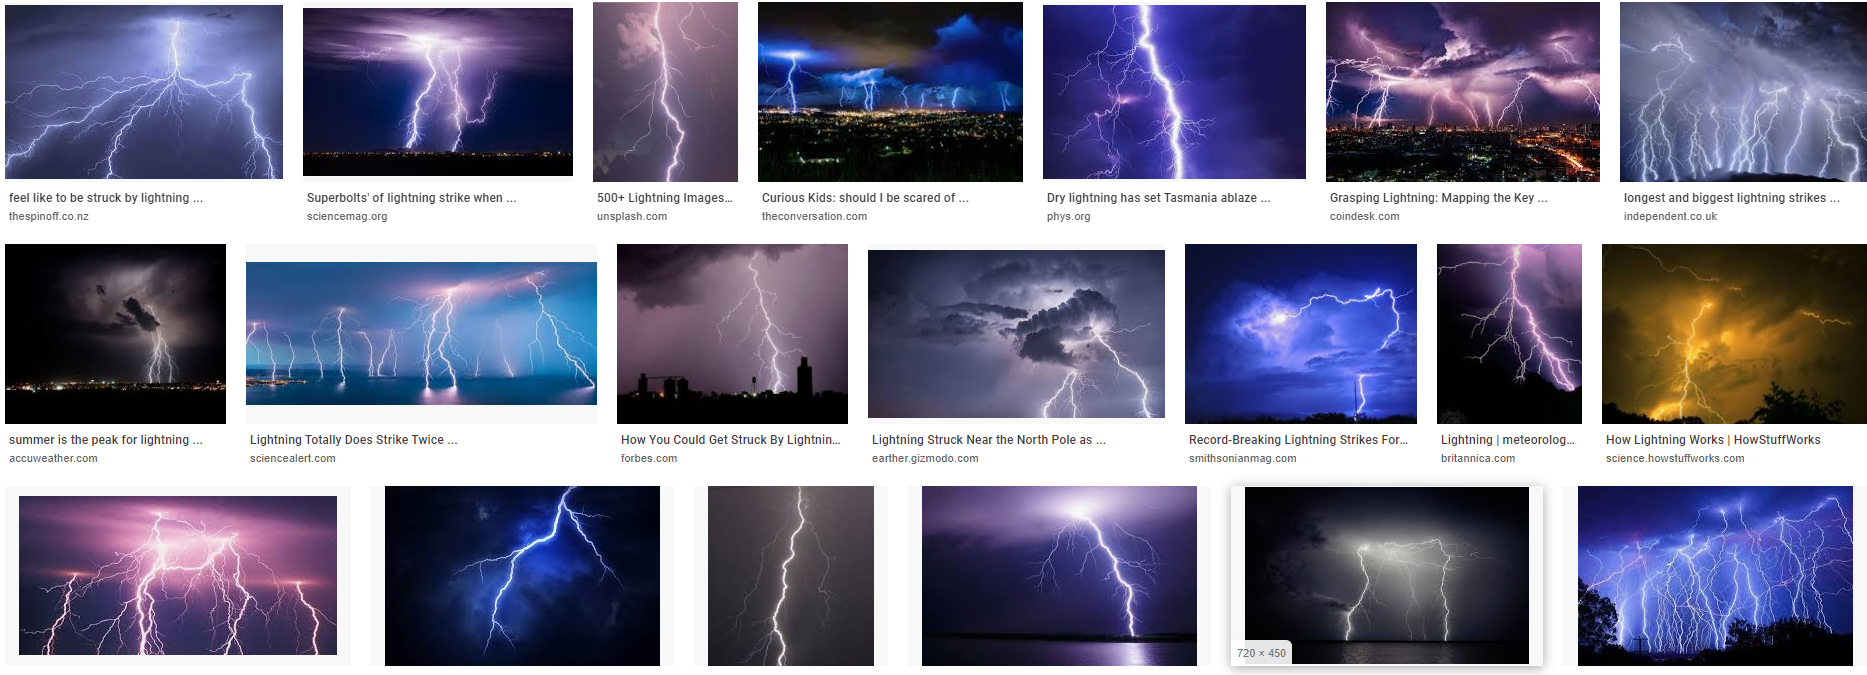 Curious Kids: should I be scared of lightning?